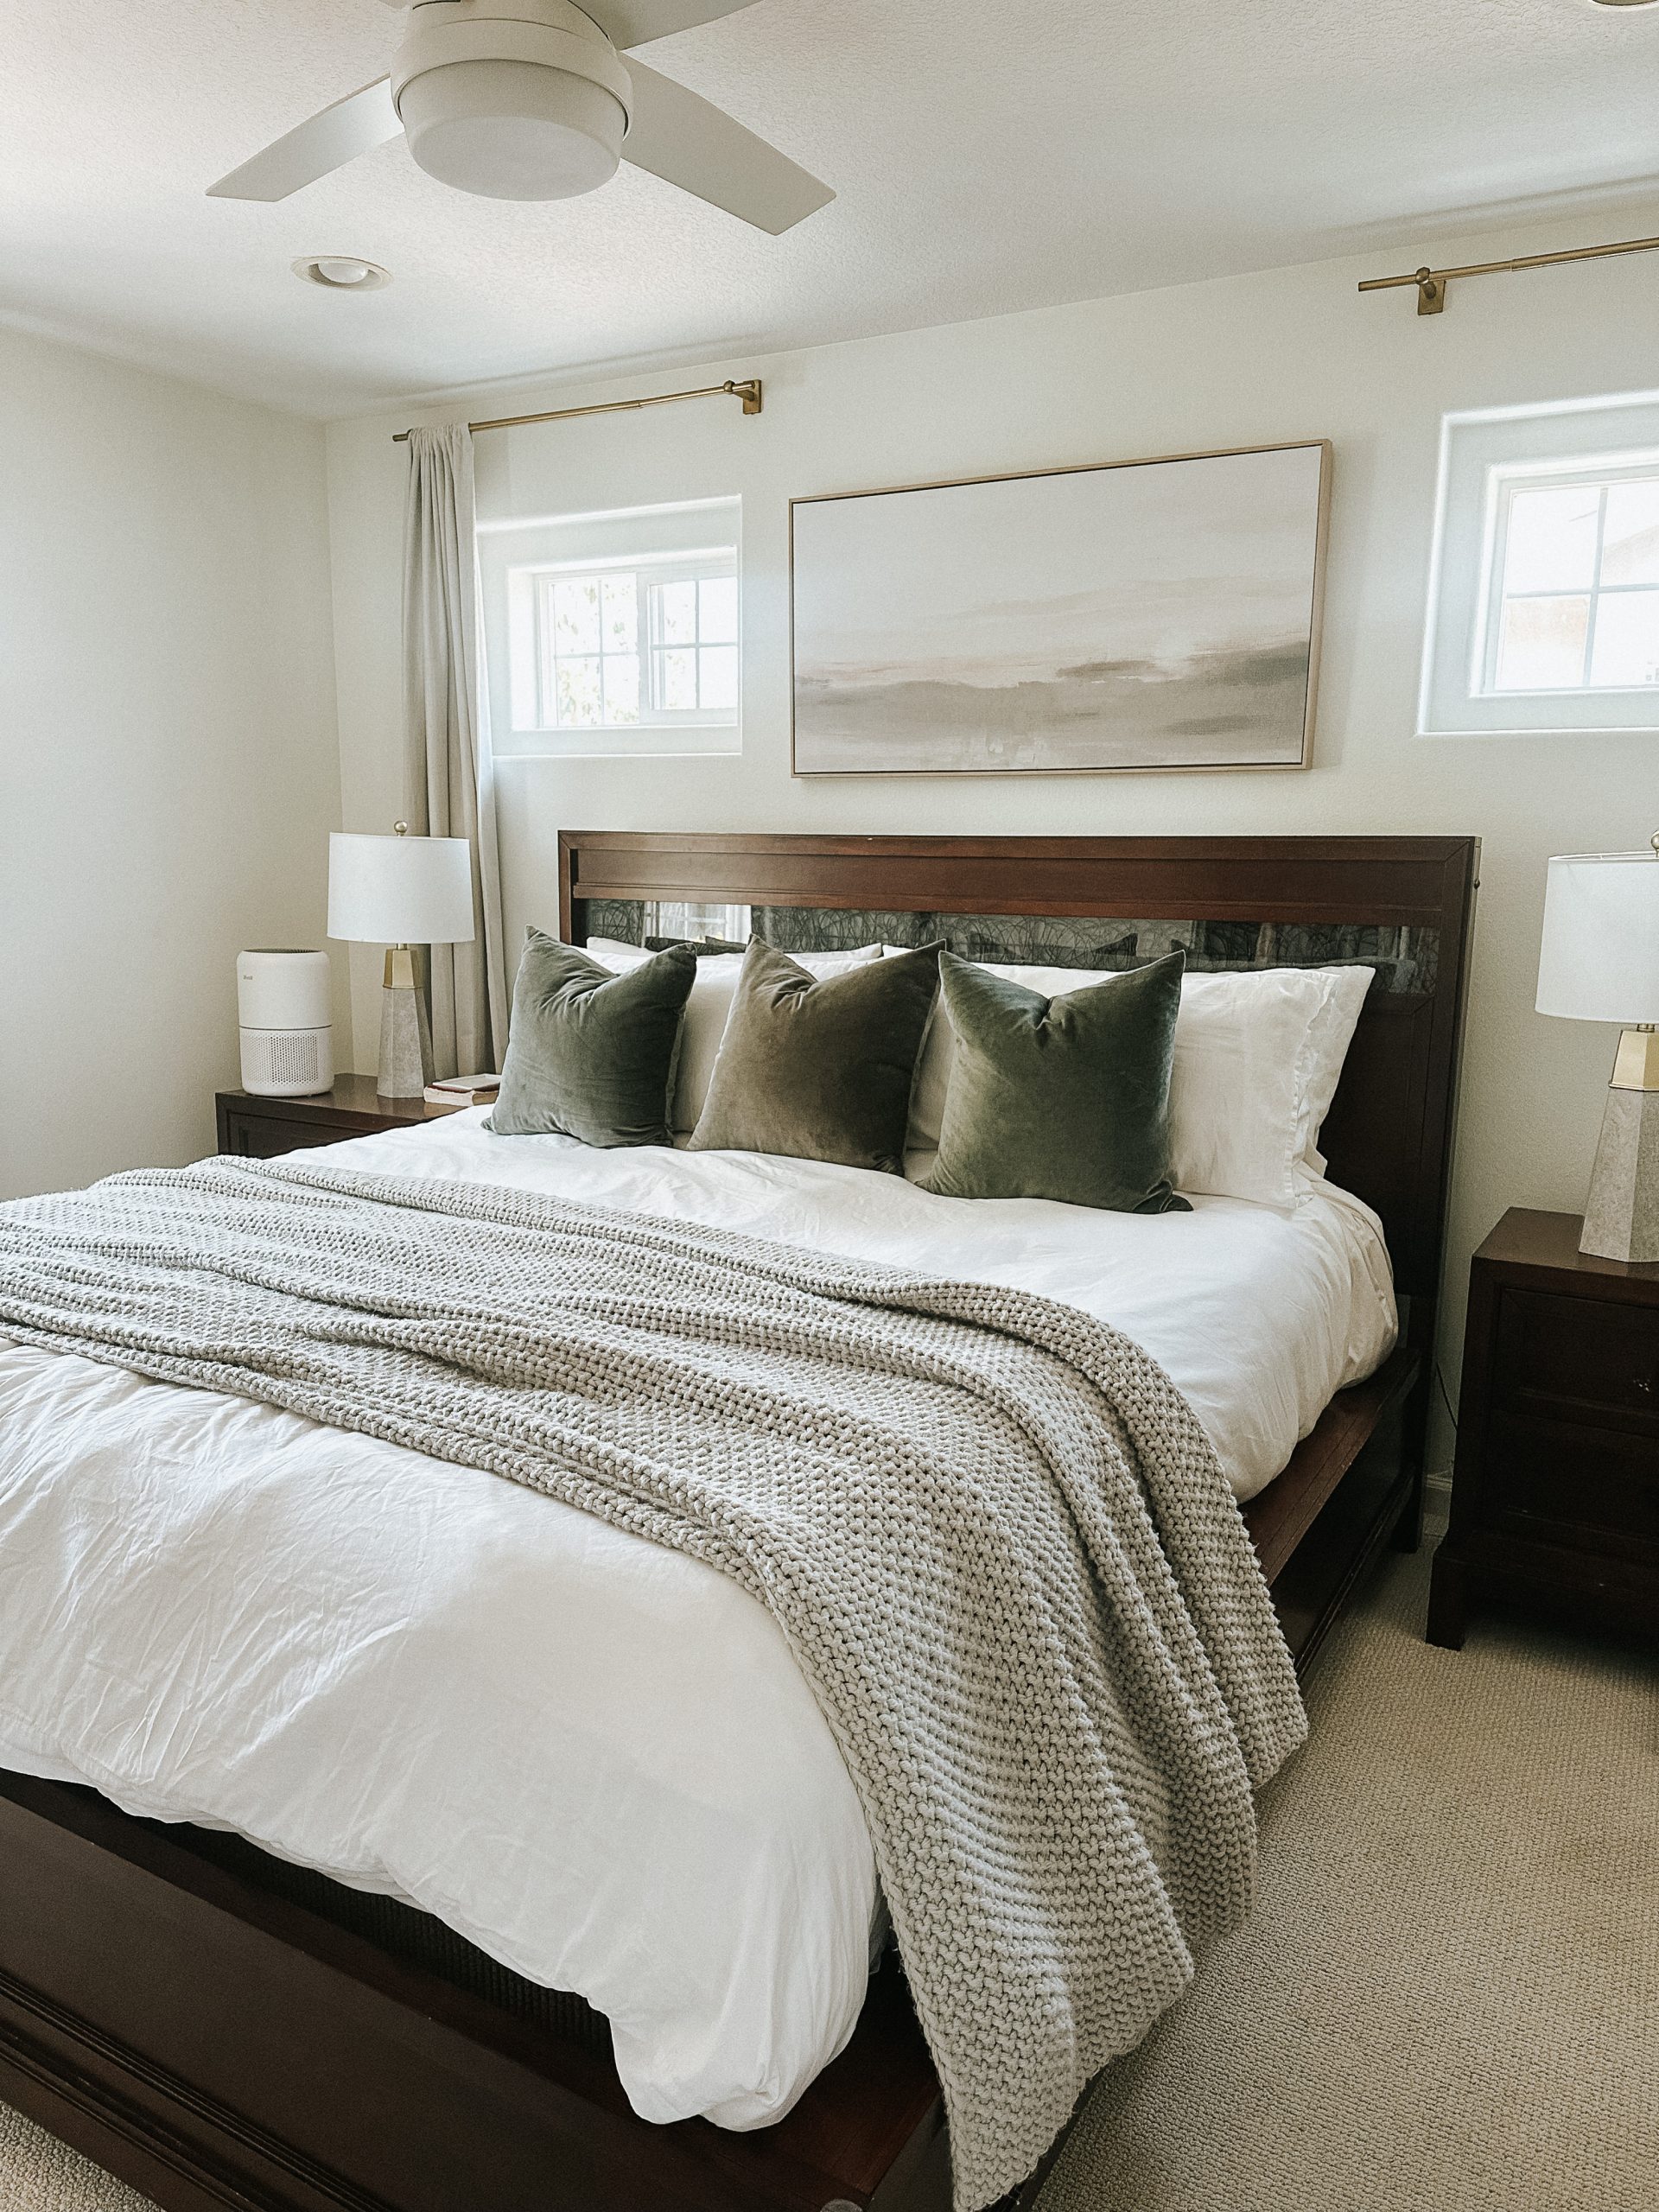 How to Layer Pillows on a King and Queen Bed - Dwell & Oak